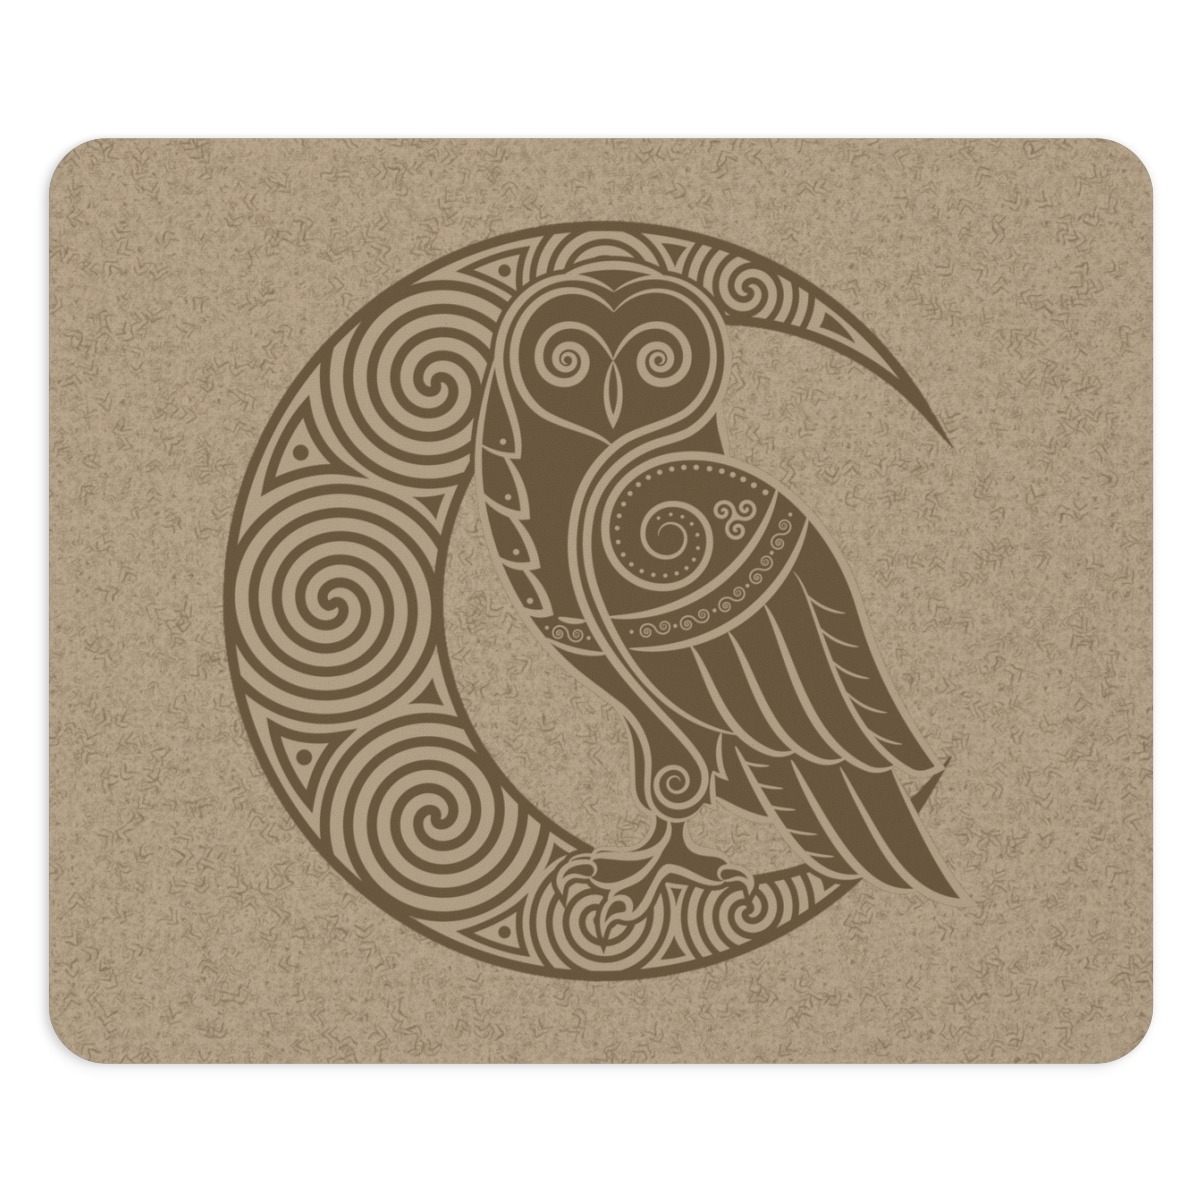 Gold Celtic Owl Moon Mouse Pad